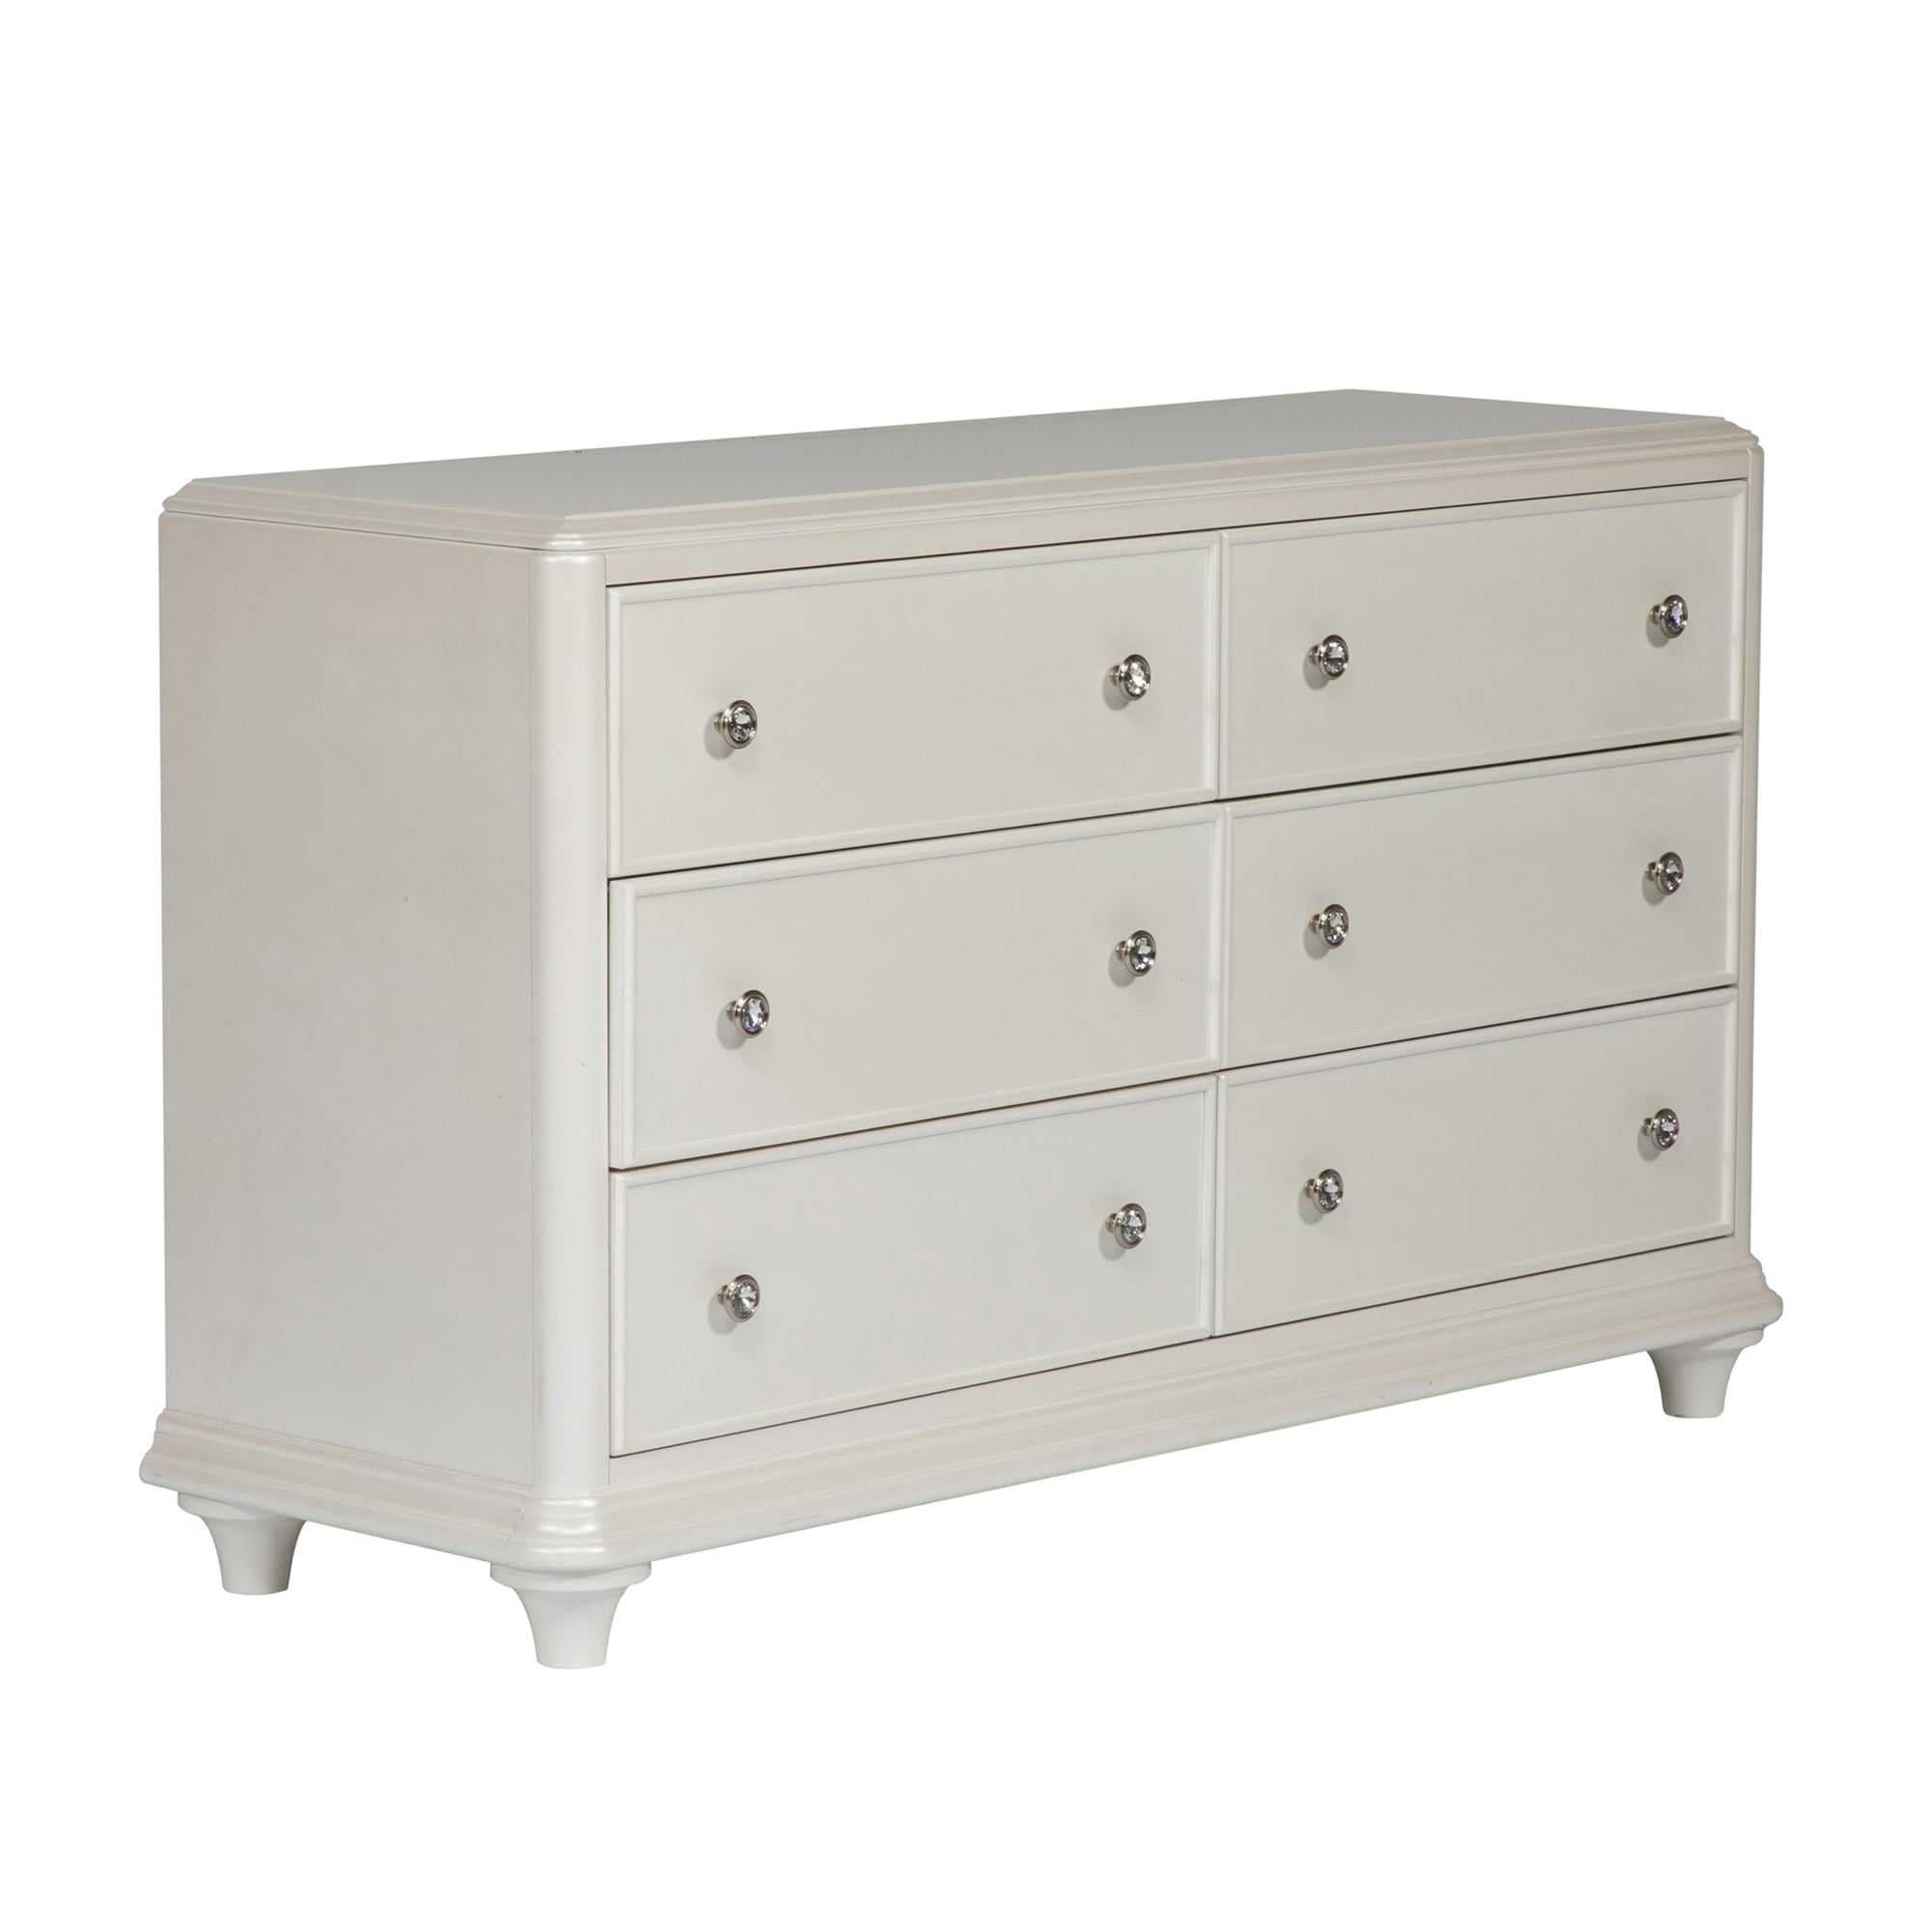 Liberty Furniture Stardust 710-BR30 Glam 6-Drawer Dresser with